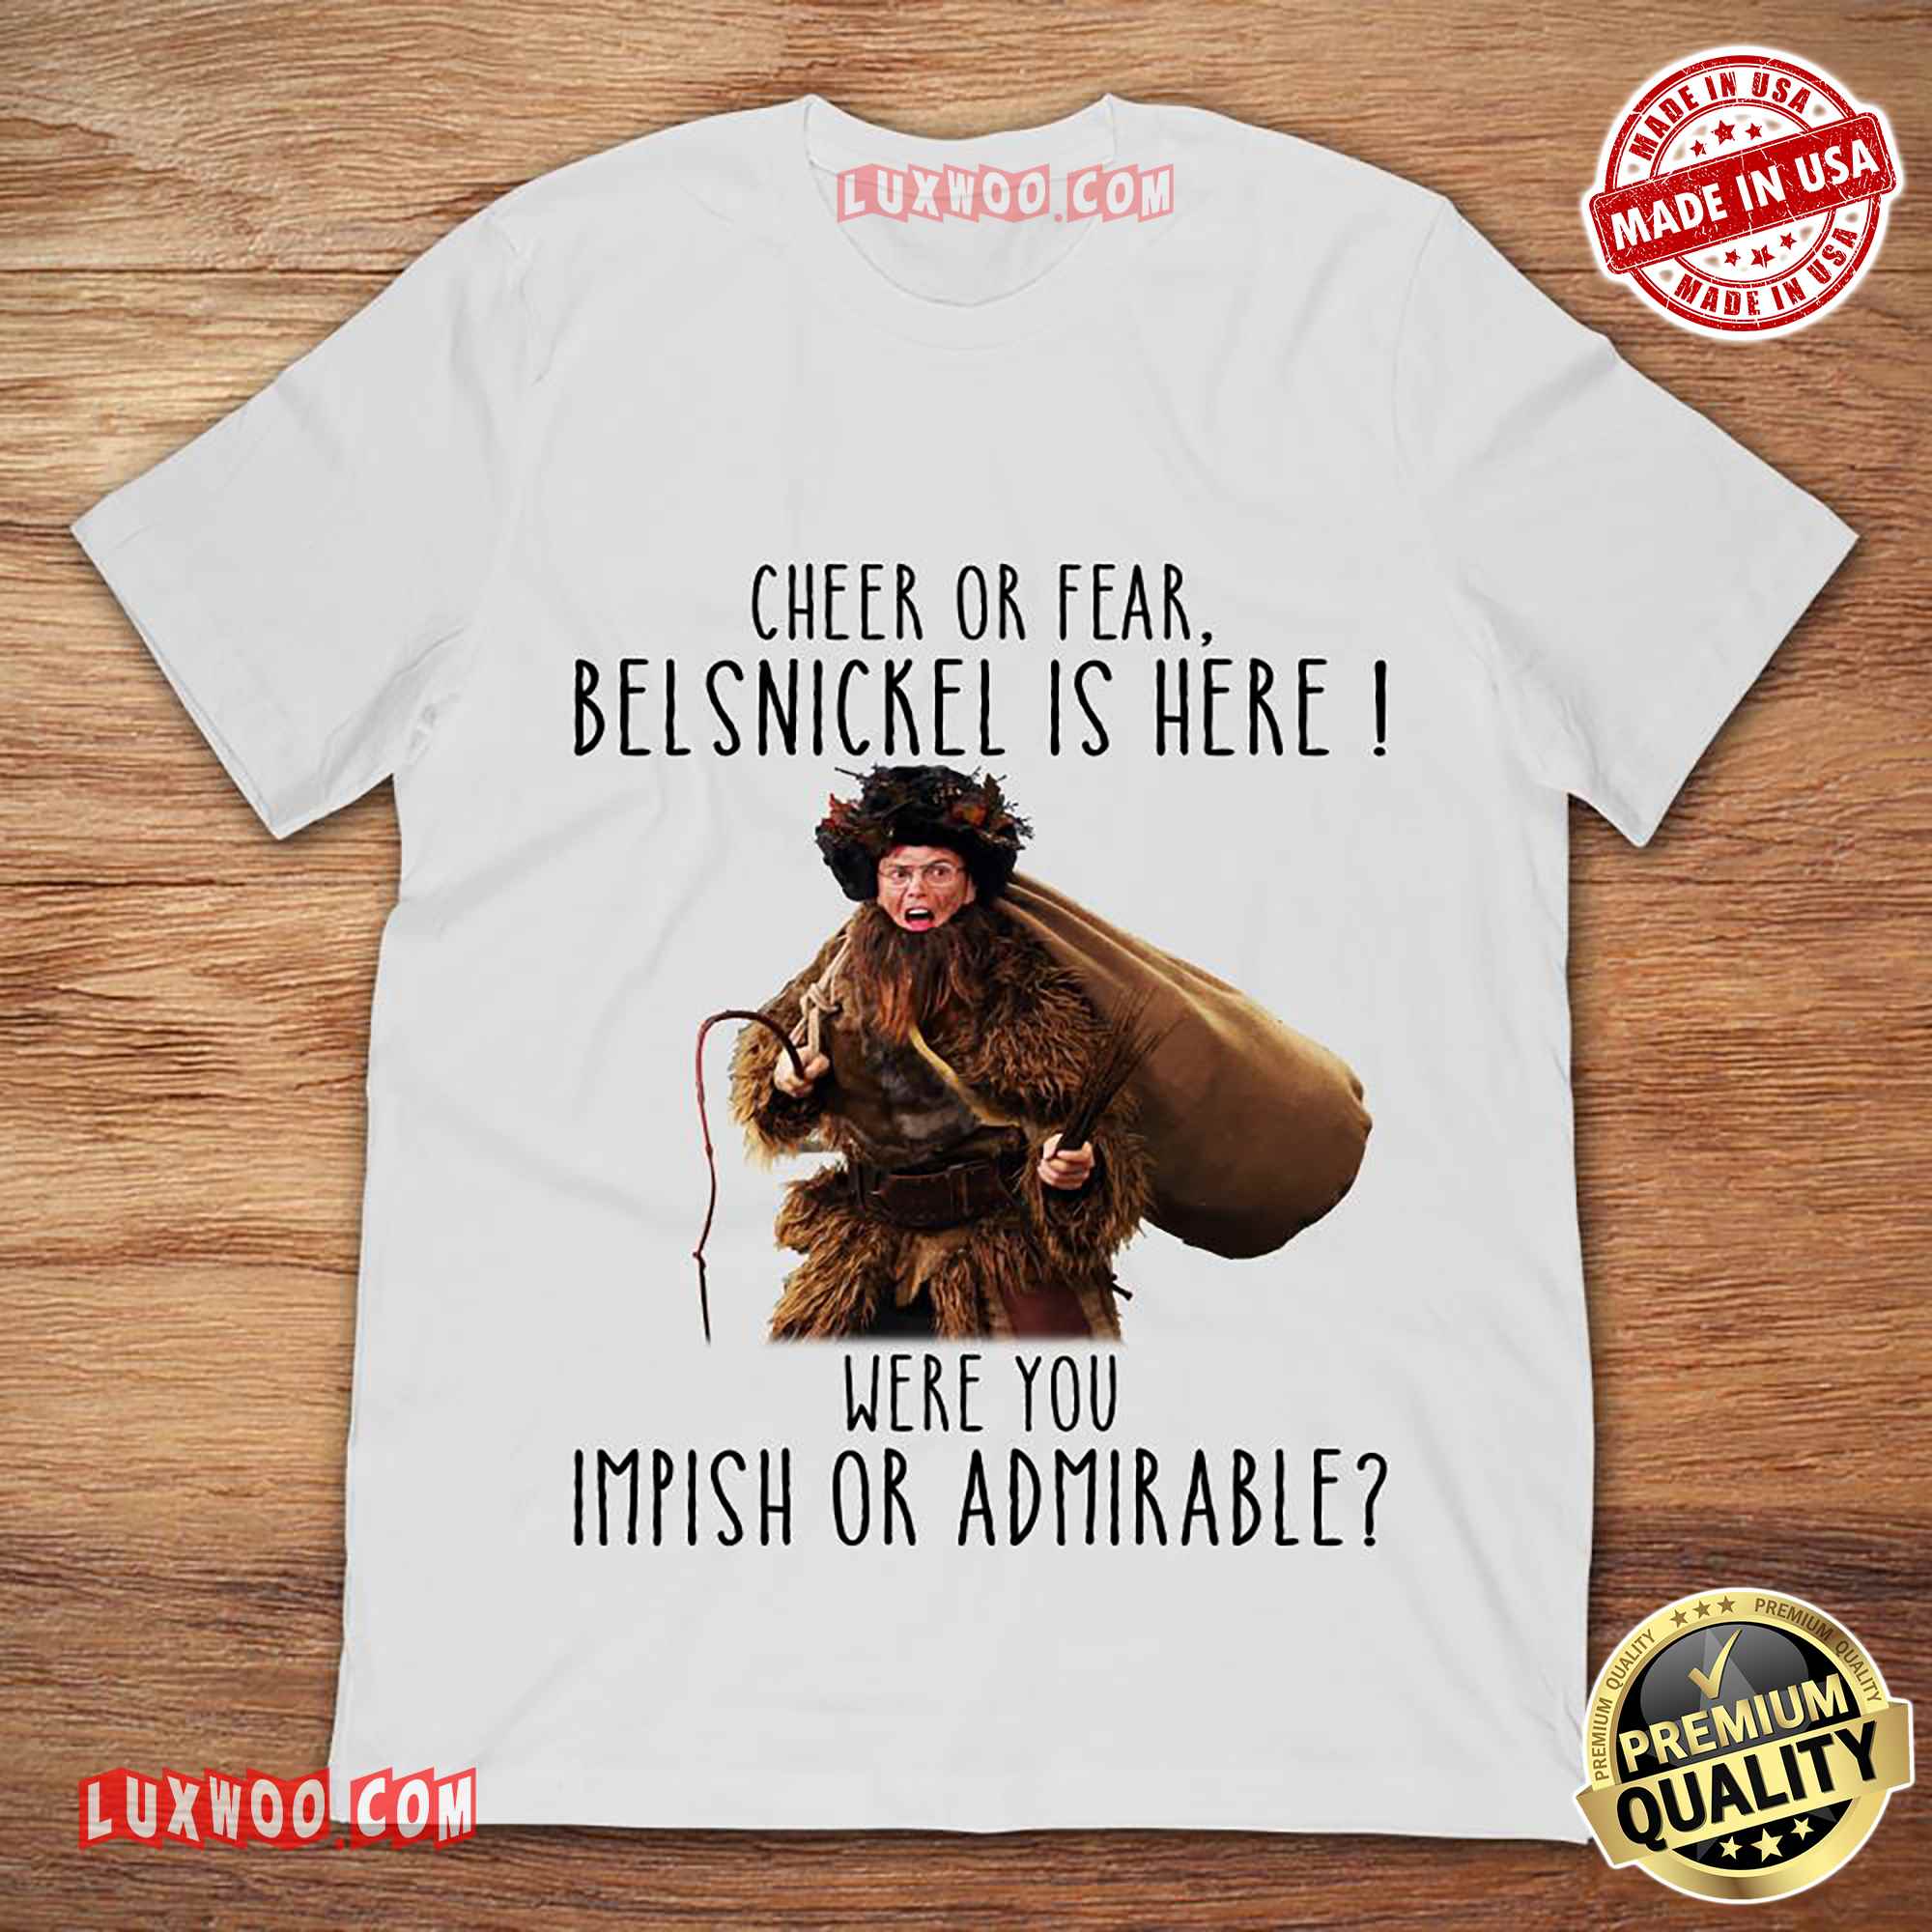 Cheer Or Fear Belsnickel Is Here Are You Impish Or Admirable Christmas Tee Shirt